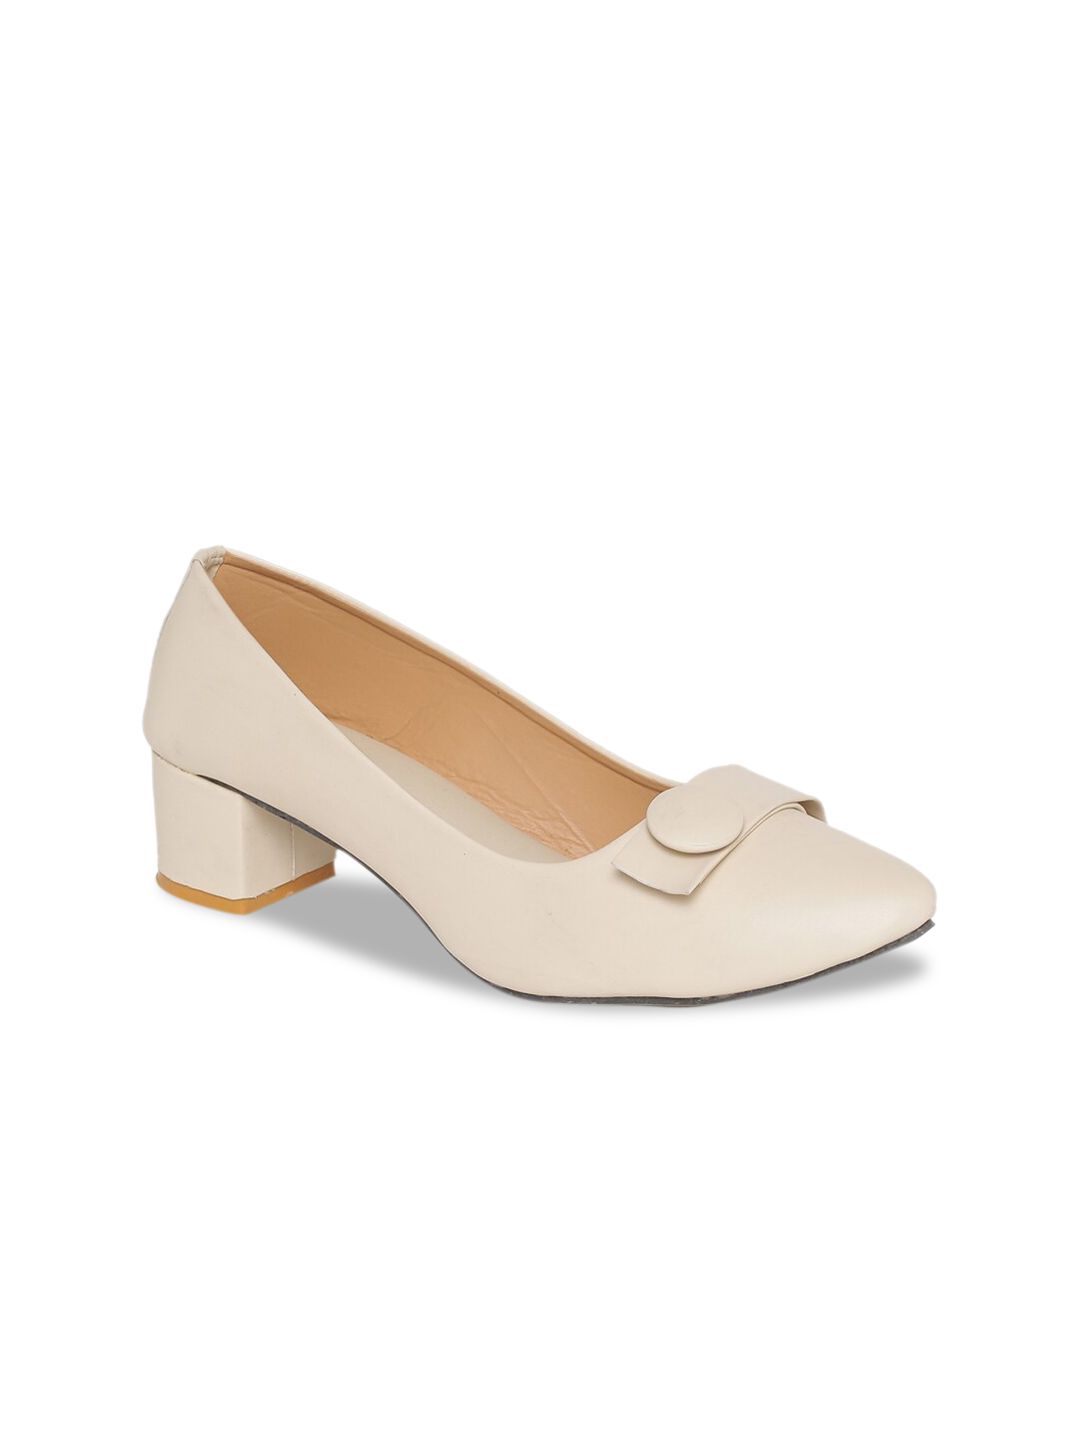 Padvesh Women Off-White Solid Pumps Price in India